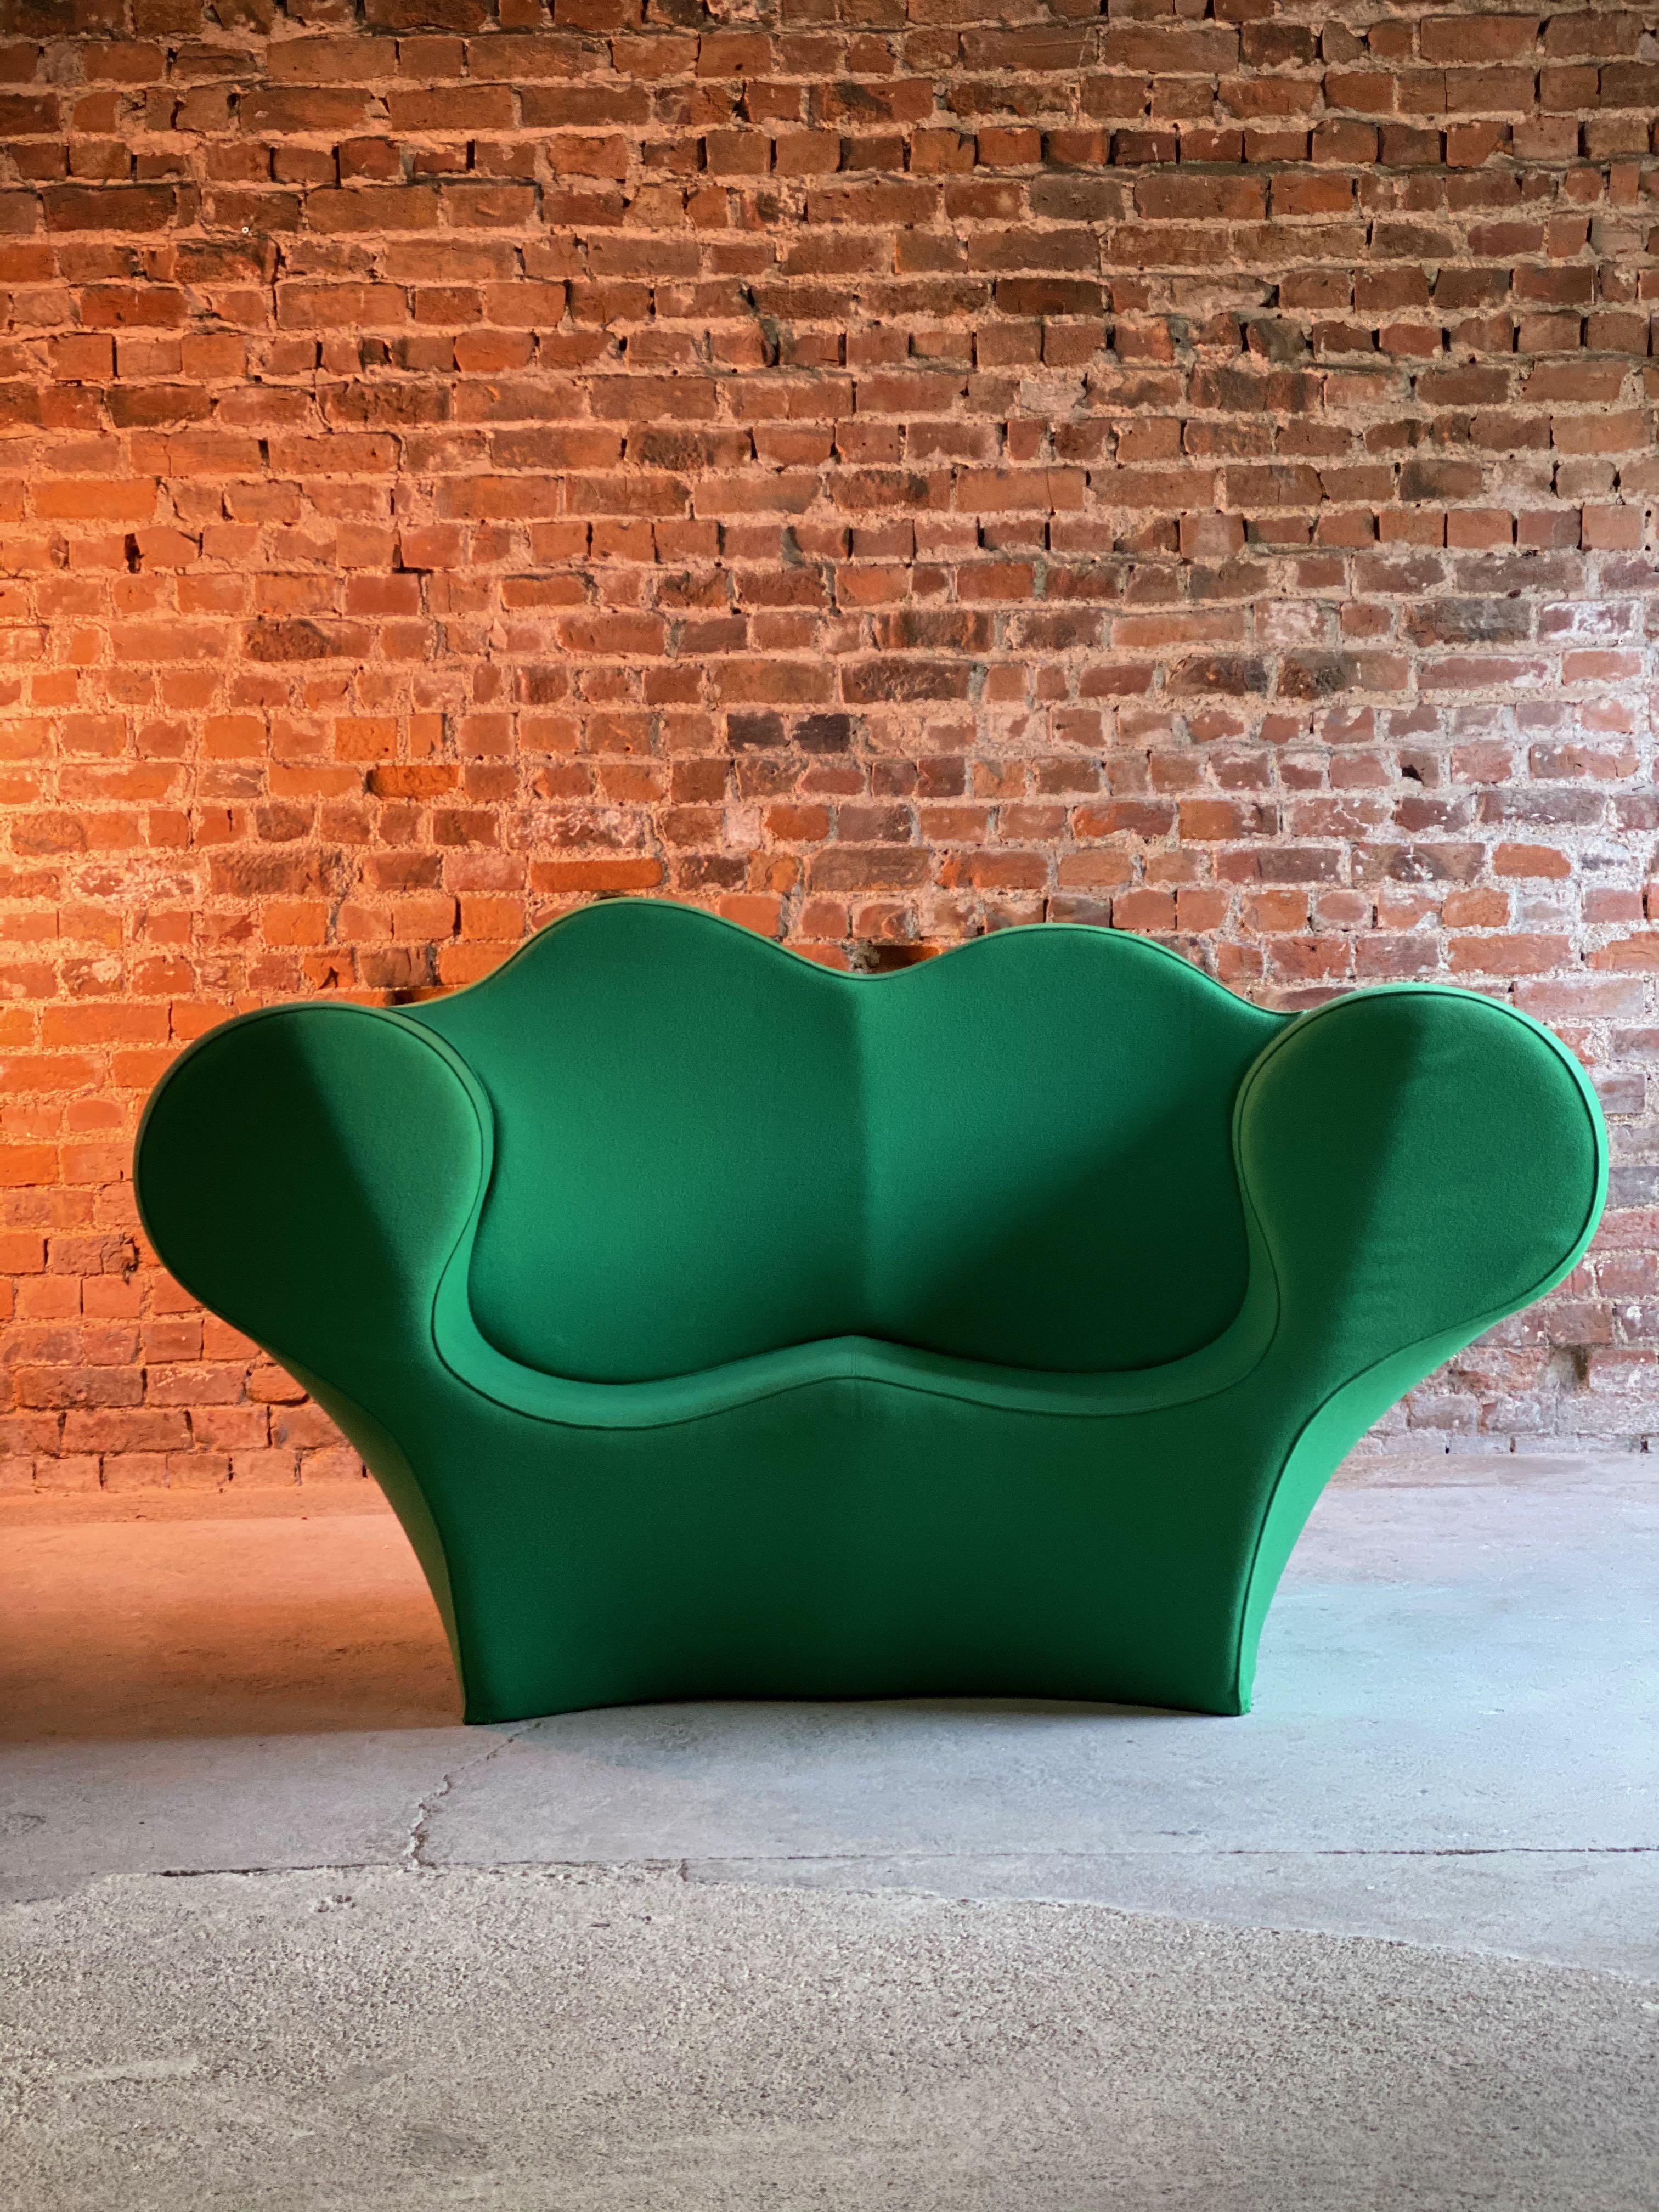 Ron Arad double soft big easy sofa in green by Moroso, Italy, circa 1991

Magnificent Ron Arad double soft big easy sofa by Moroso Italy circa 1991, this collection has become something of a trademark, Its generous curves and voluptuous forms